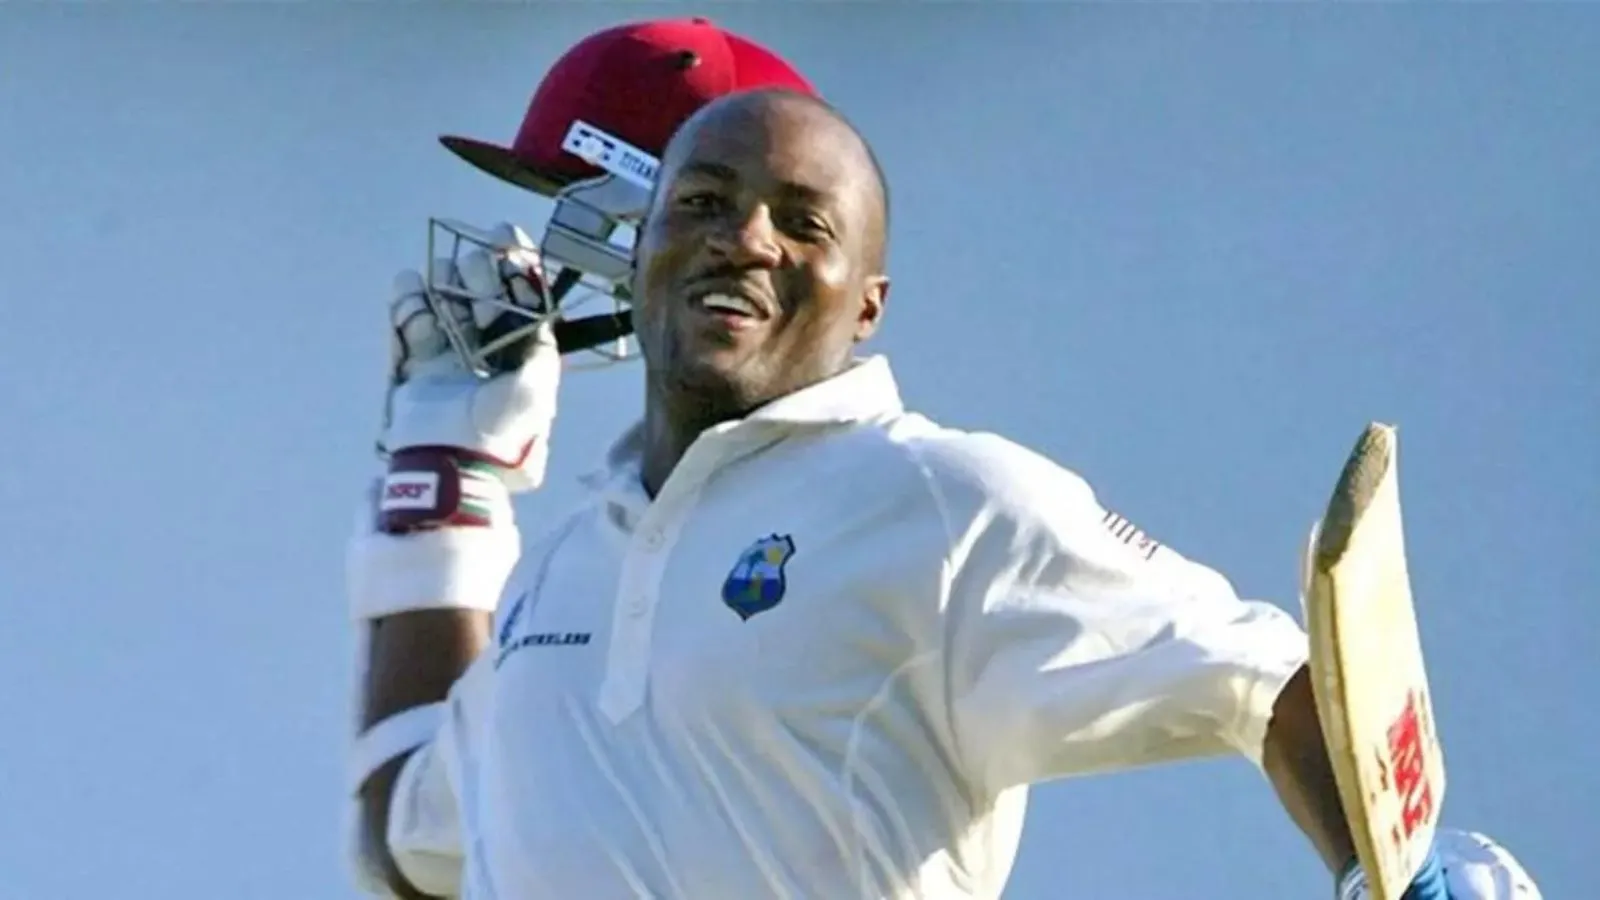 Brian Lara predicts semi-finalists and finalists for World Cup